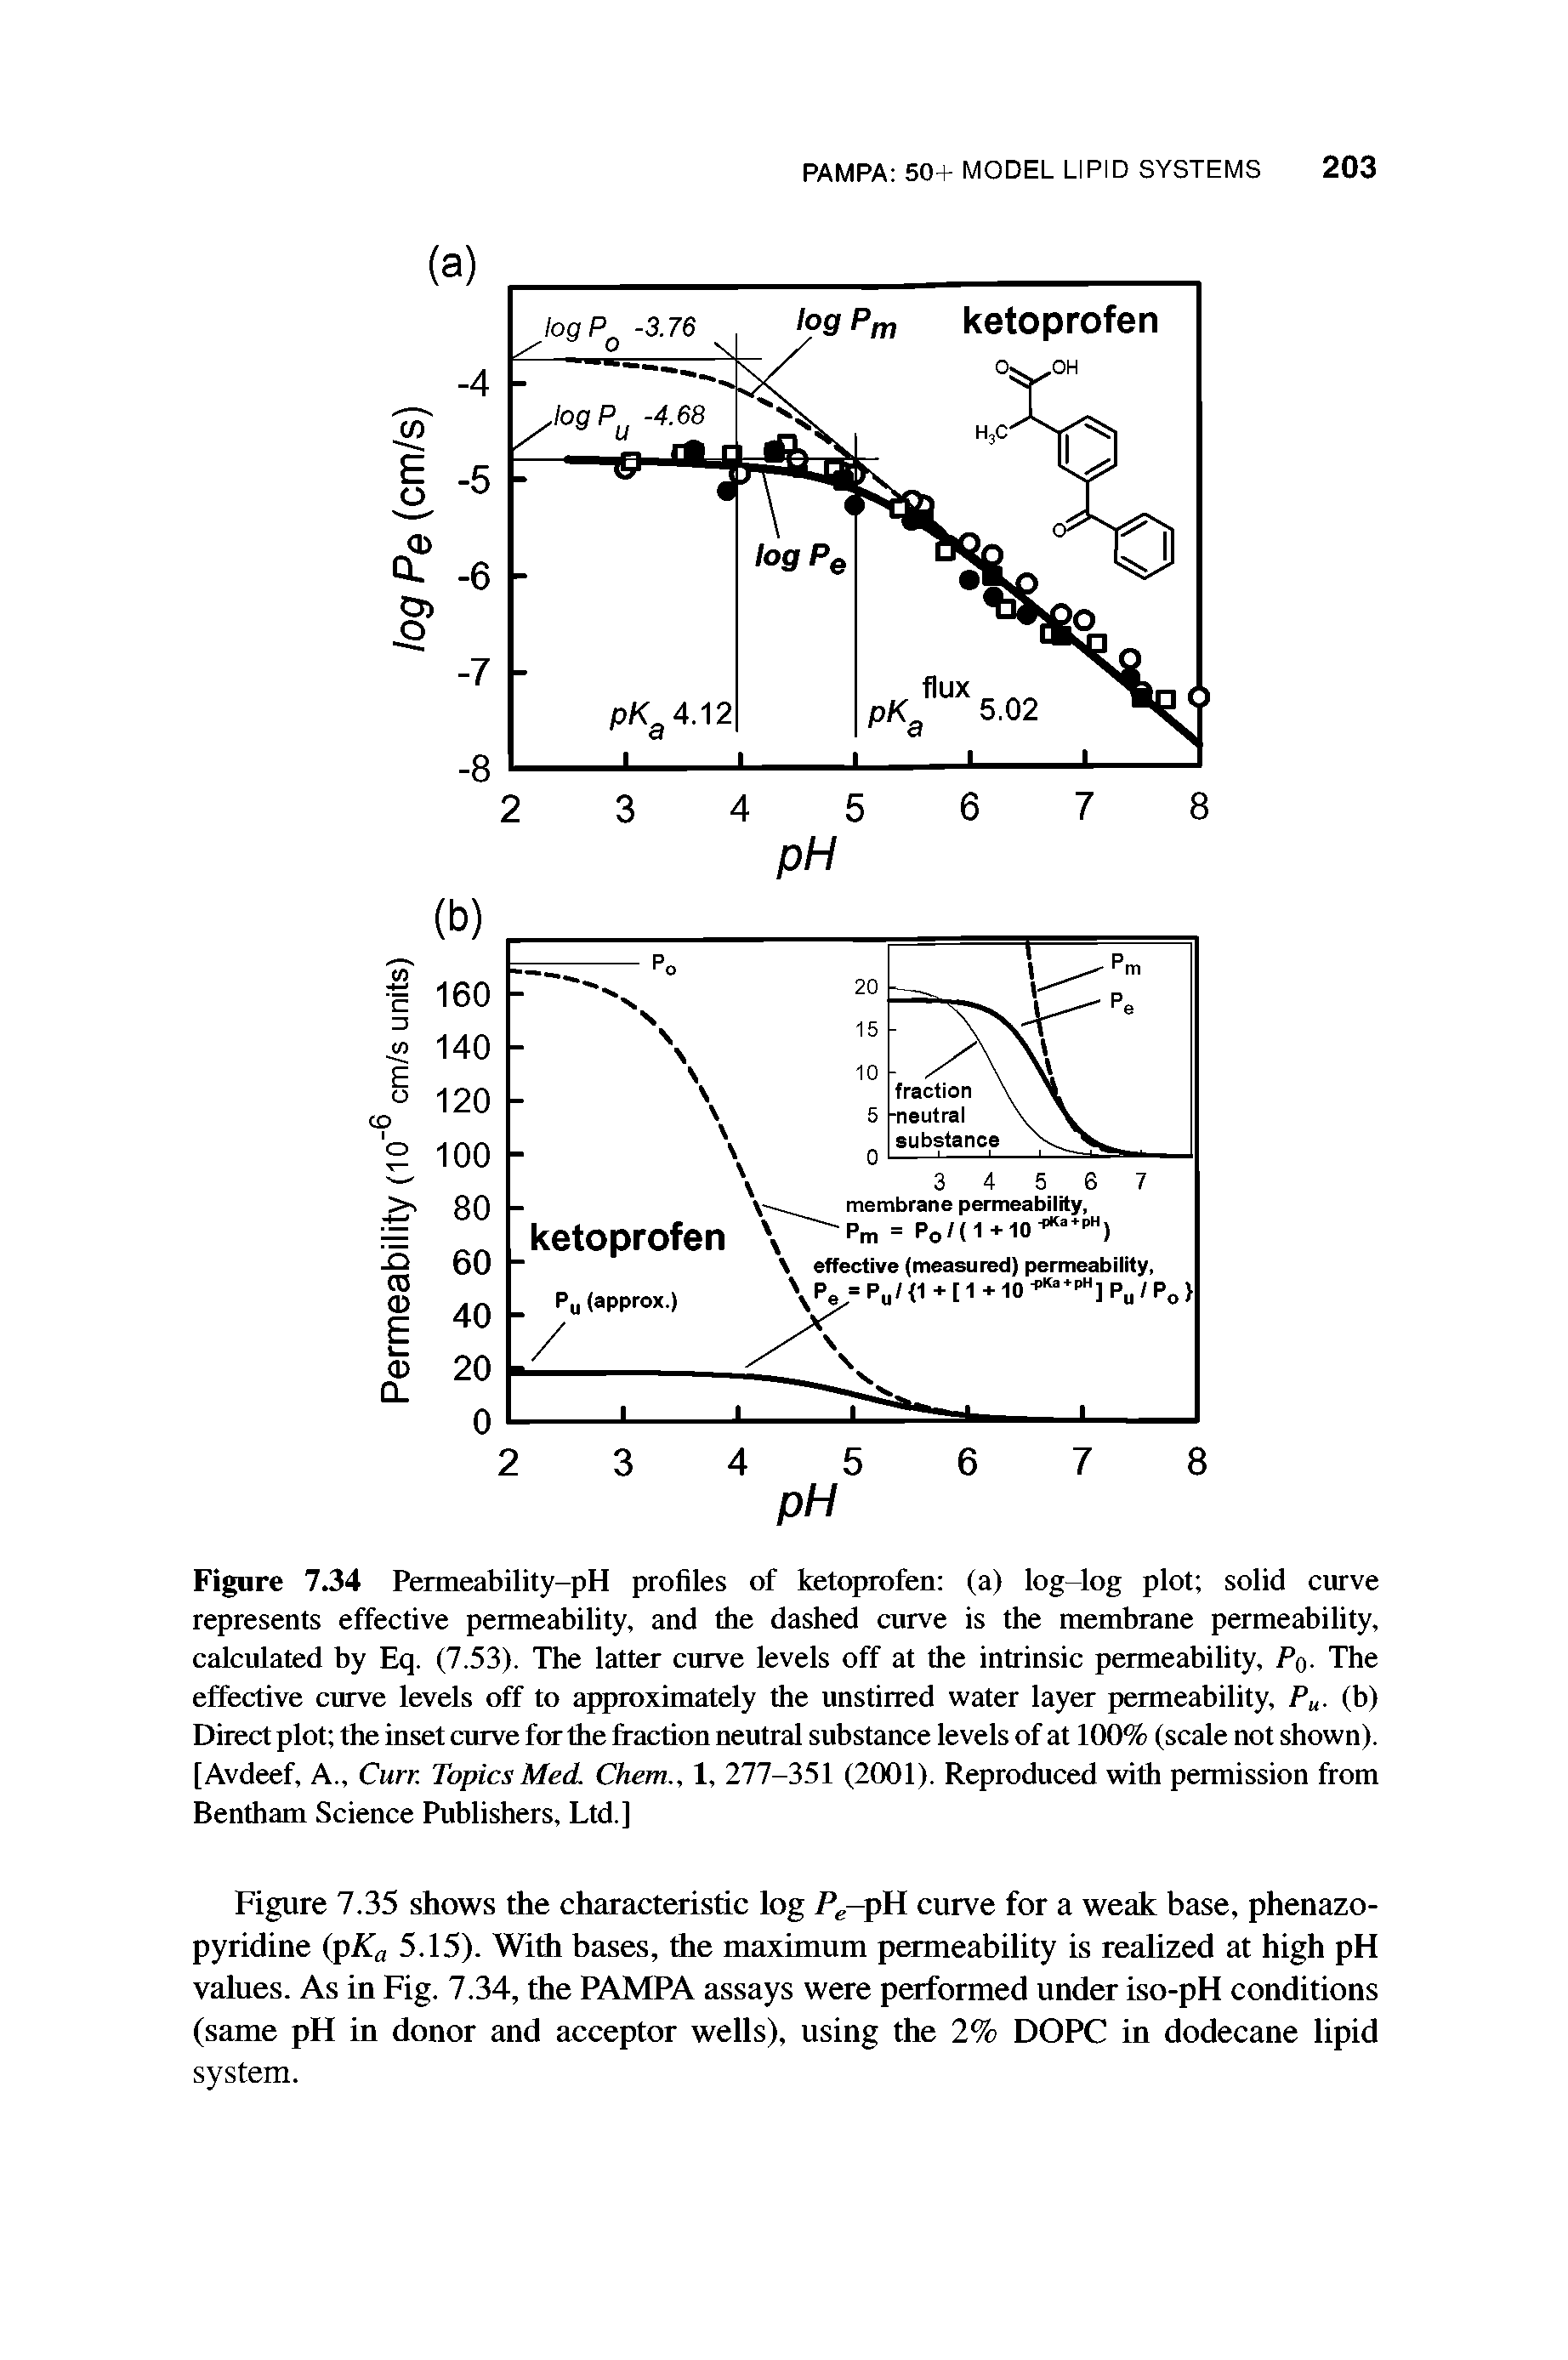 Figure 7.34 Permeability-pH profiles of ketoprofen (a) log-log plot solid curve represents effective permeability, and the dashed curve is the membrane permeability, calculated by Eq. (7.53). The latter curve levels off at the intrinsic permeability, Pq. The effective curve levels off to approximately the unstirred water layer permeability, Pu. (b) Direct plot the inset curve for the fraction neutral substance levels of at 100% (scale not shown). [Avdeef, A., Curr. Topics Med. Chem., 1, 277-351 (2001). Reproduced with permission from Bentham Science Publishers, Ltd.]...